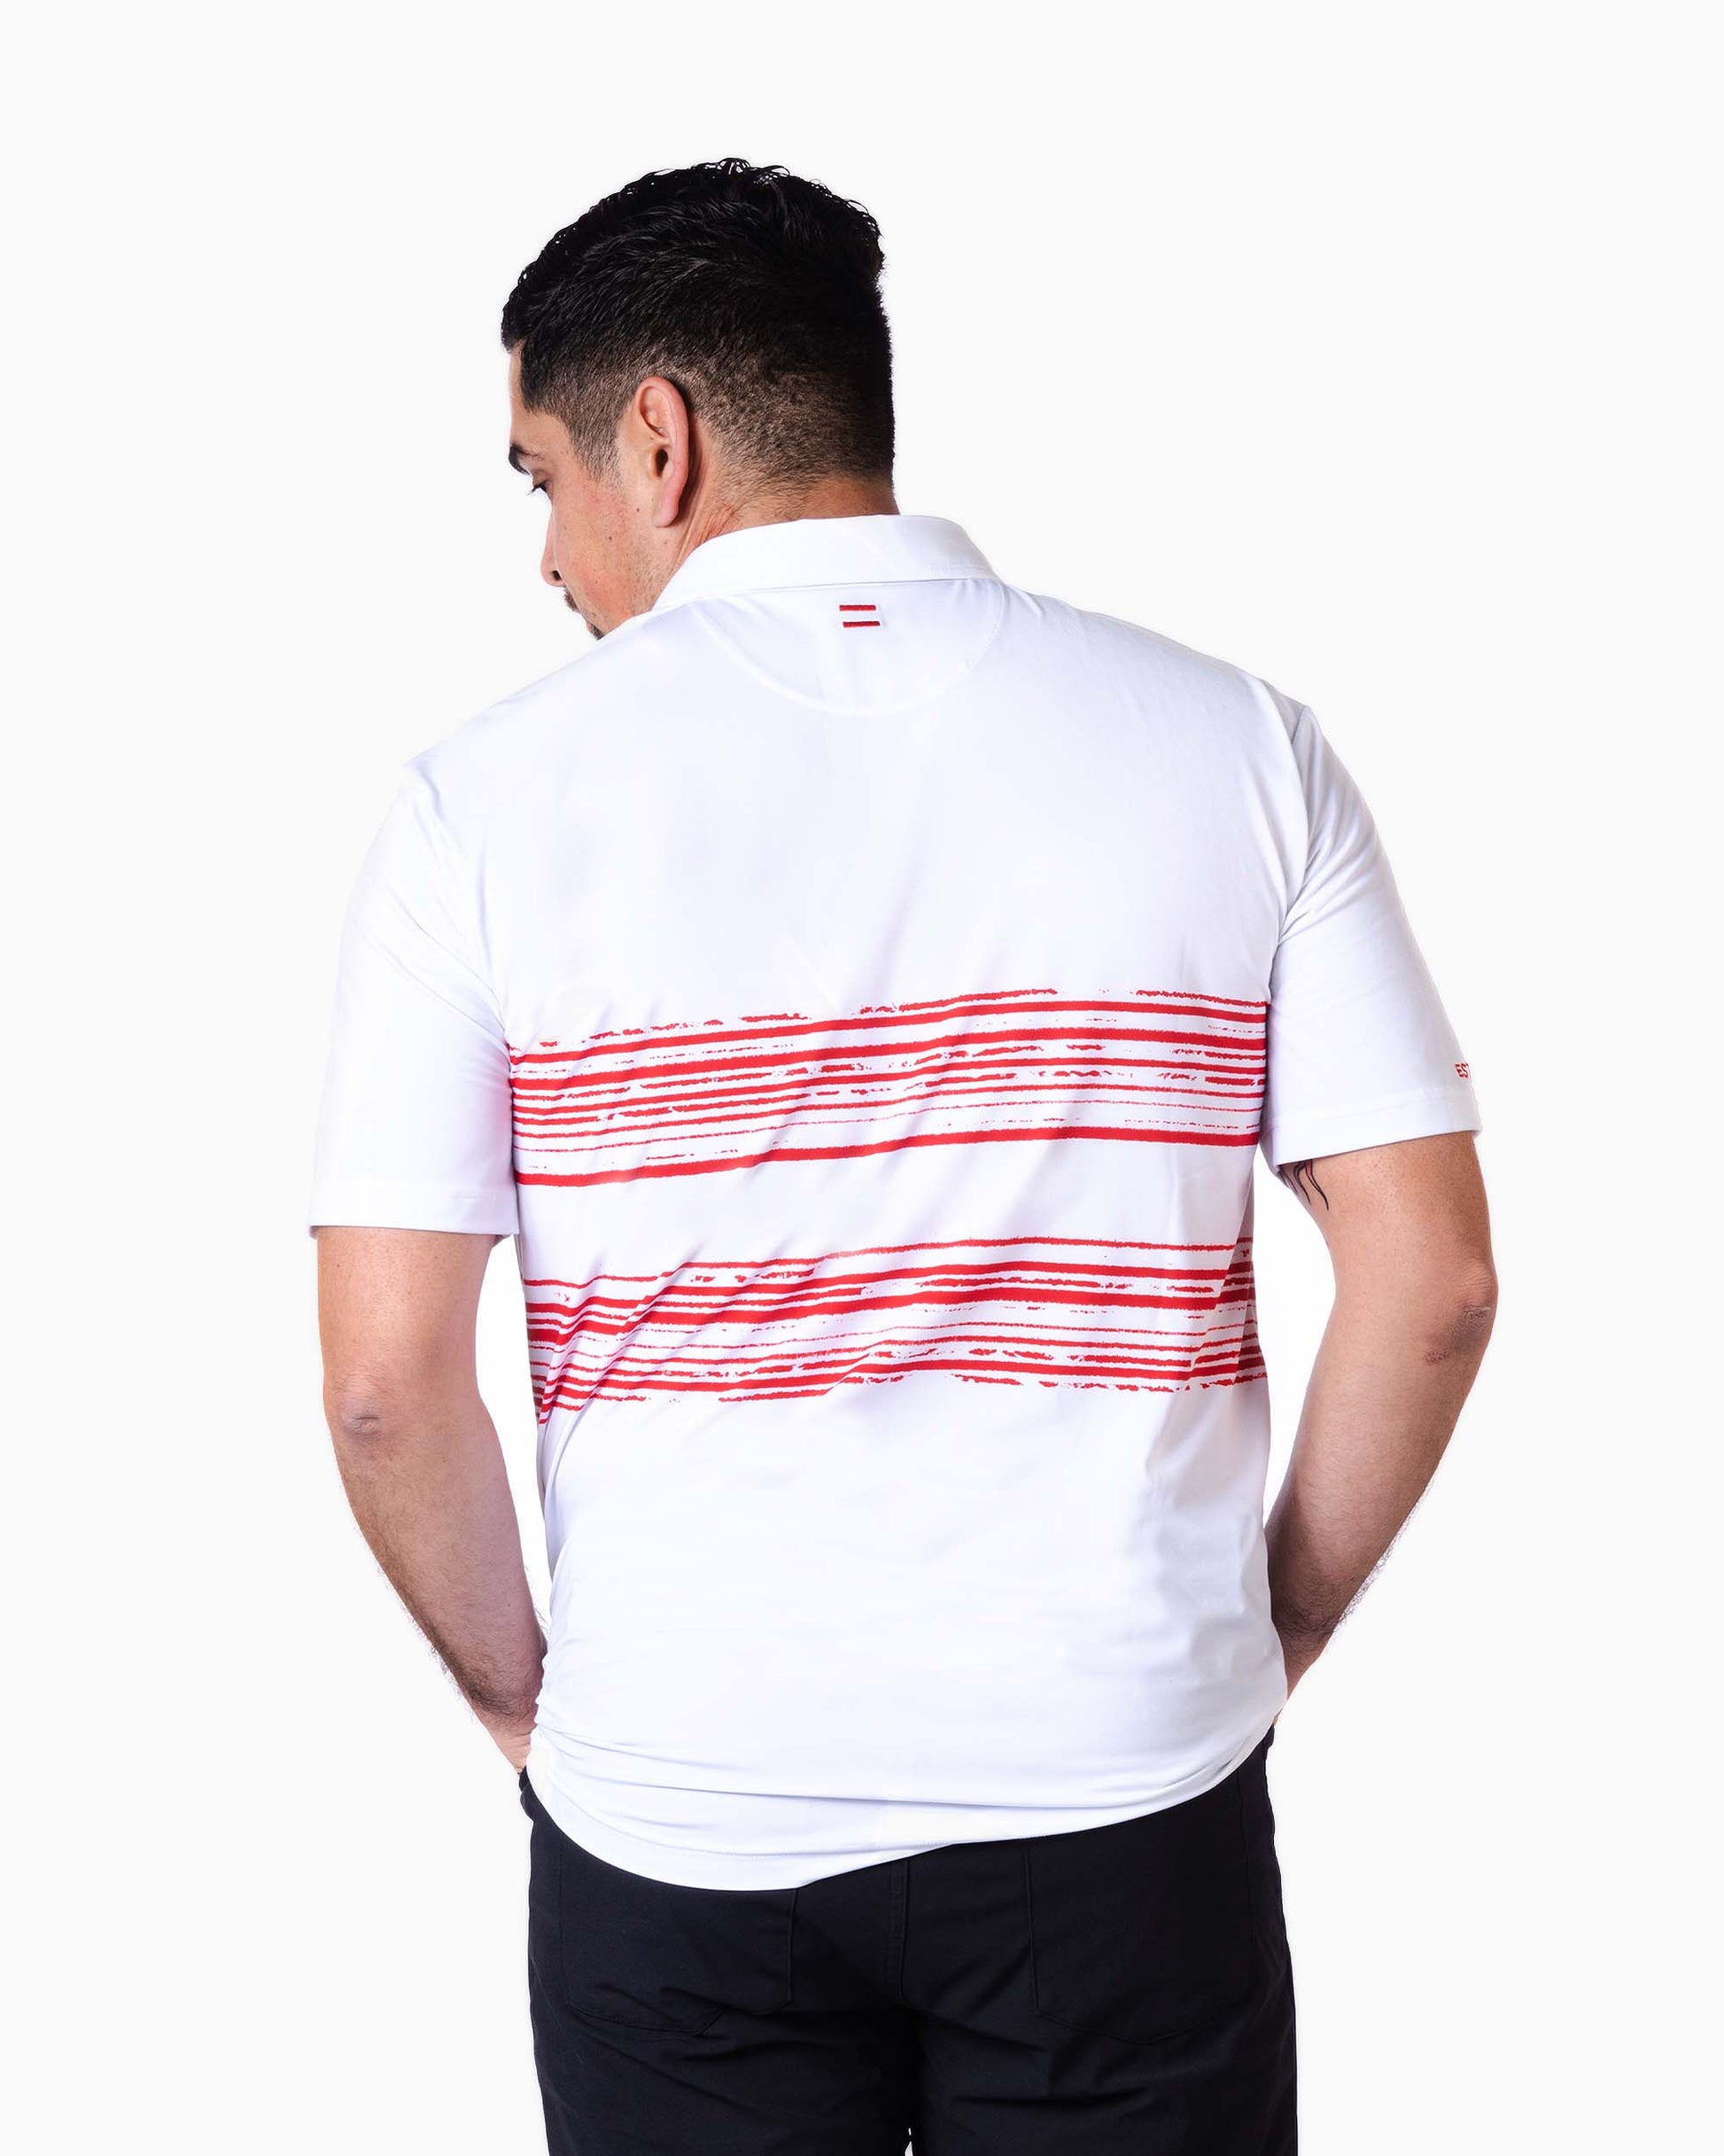 back of man wearing polo with two red woven stripes toward top